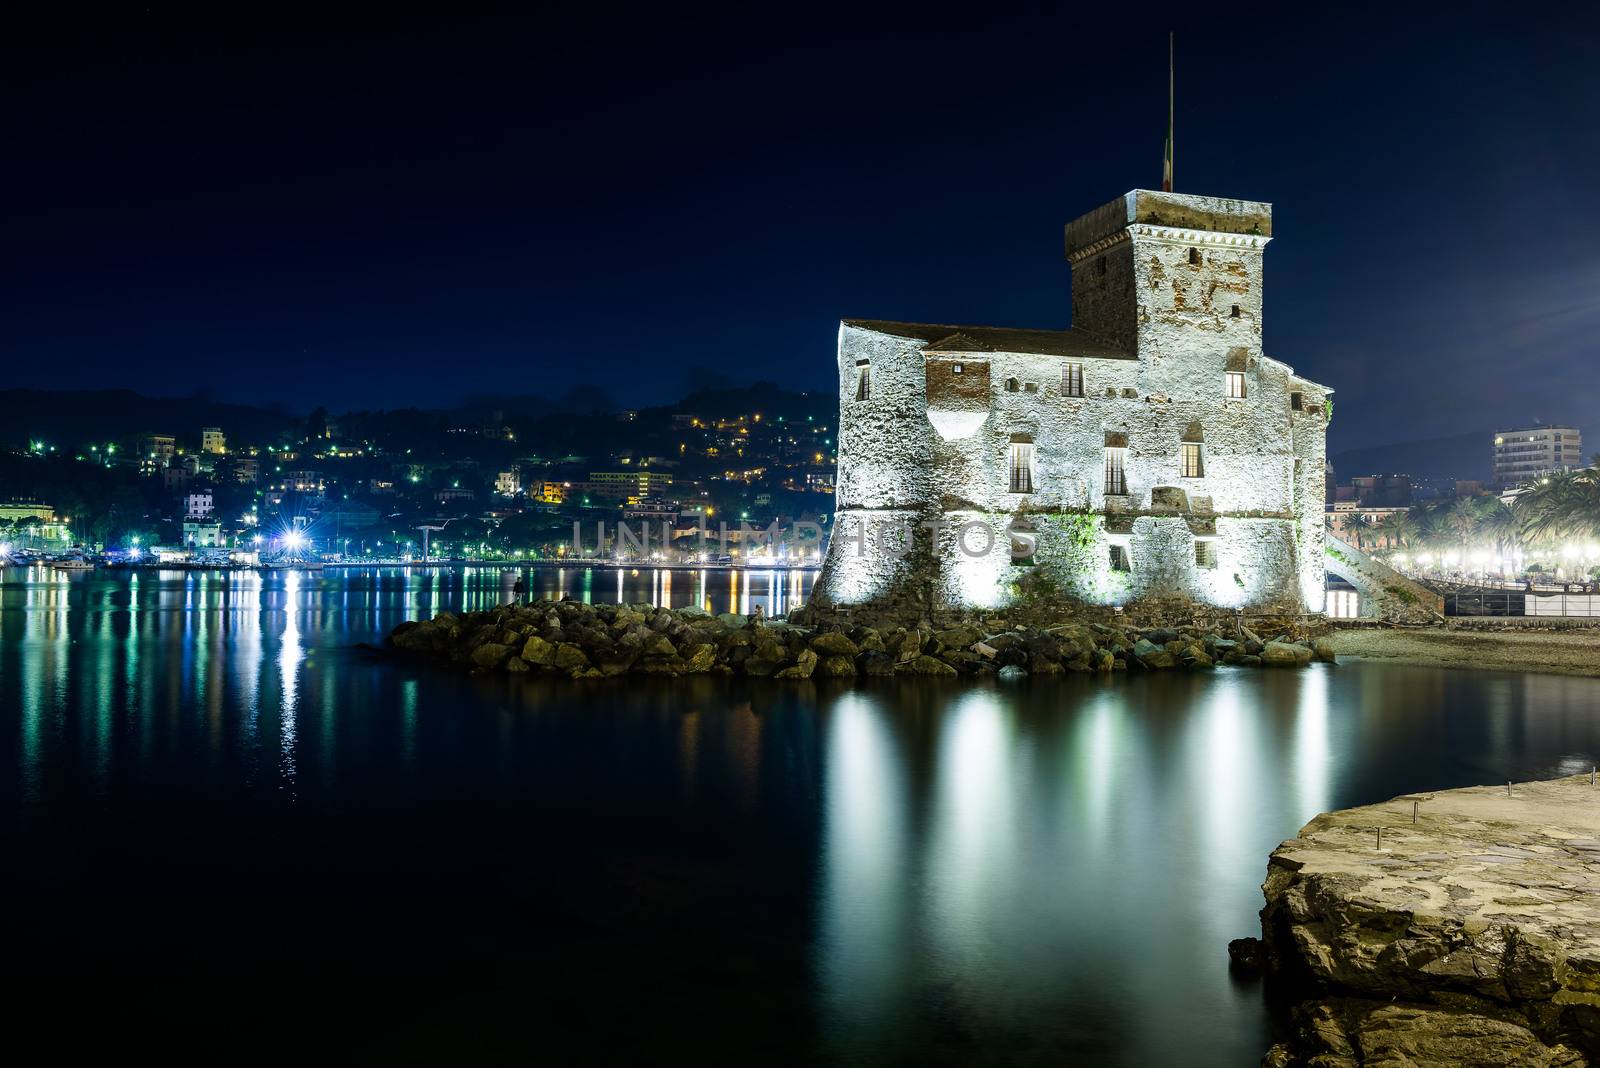 The ancient castle of Rapallo, built on the ligurian sea illuminated by night.